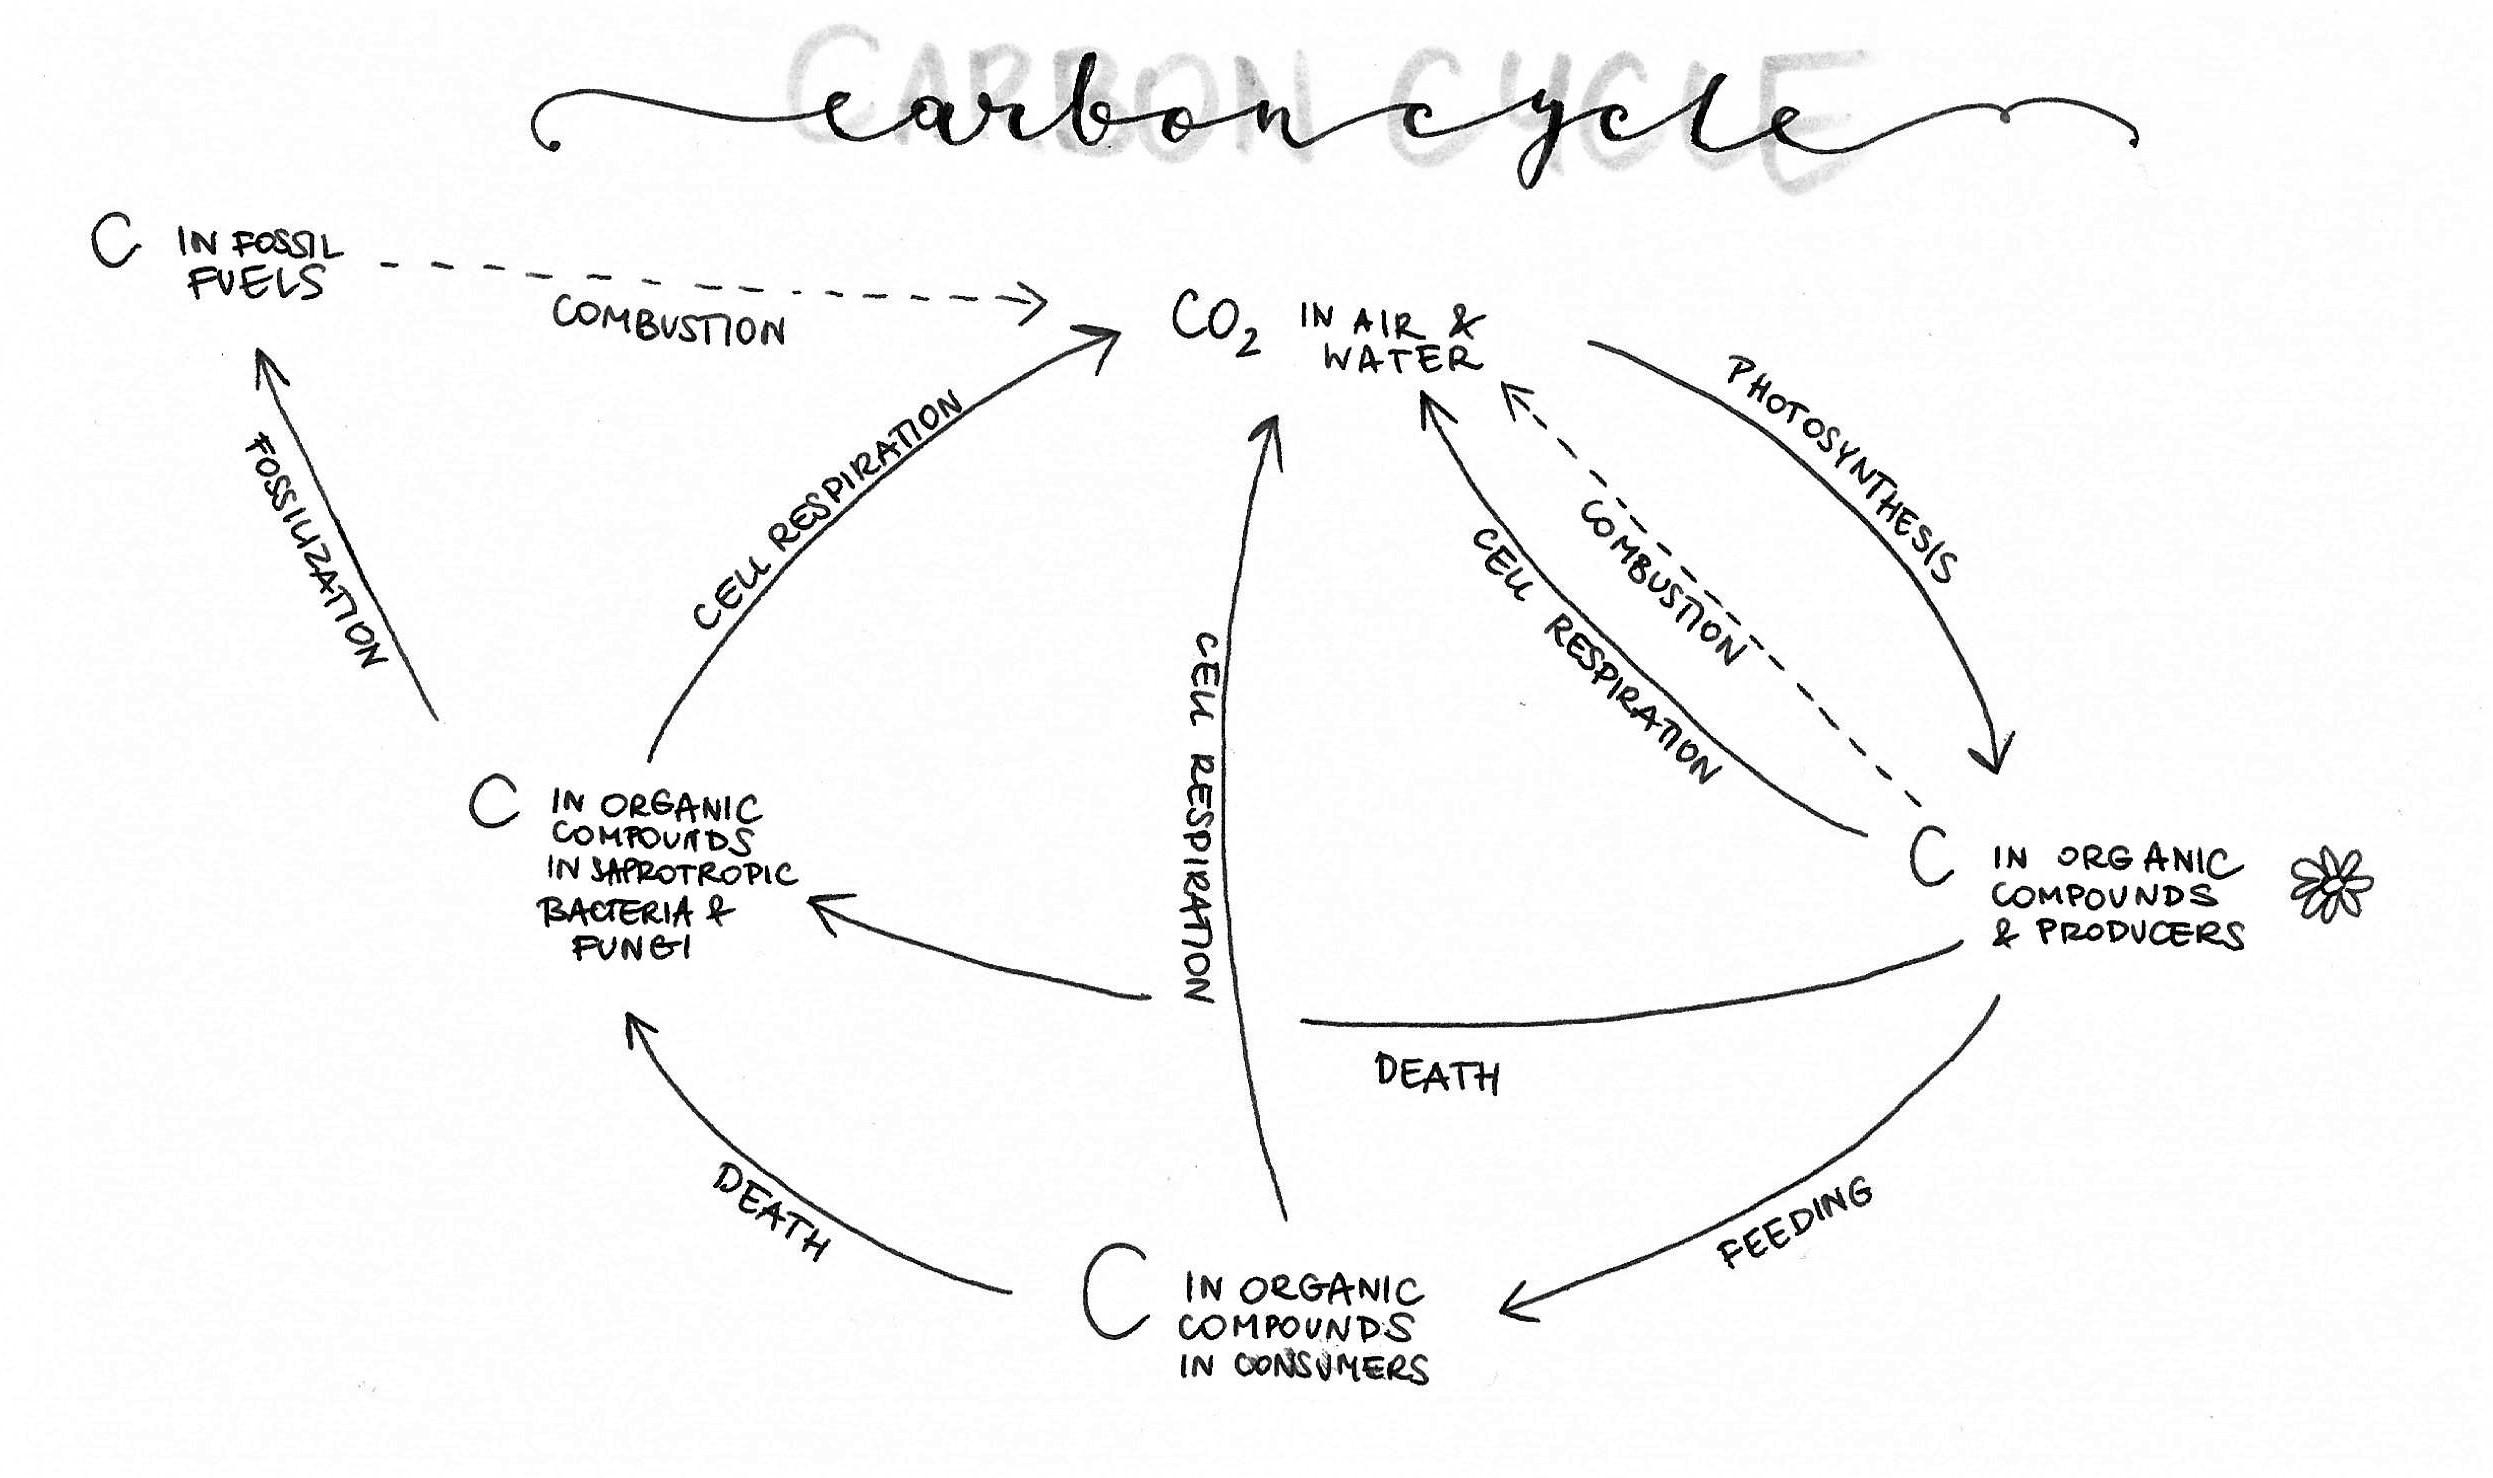 Carbon Cycle Diagram Group 4 Biology People How Does Your Carbon Cycle Diagram Look